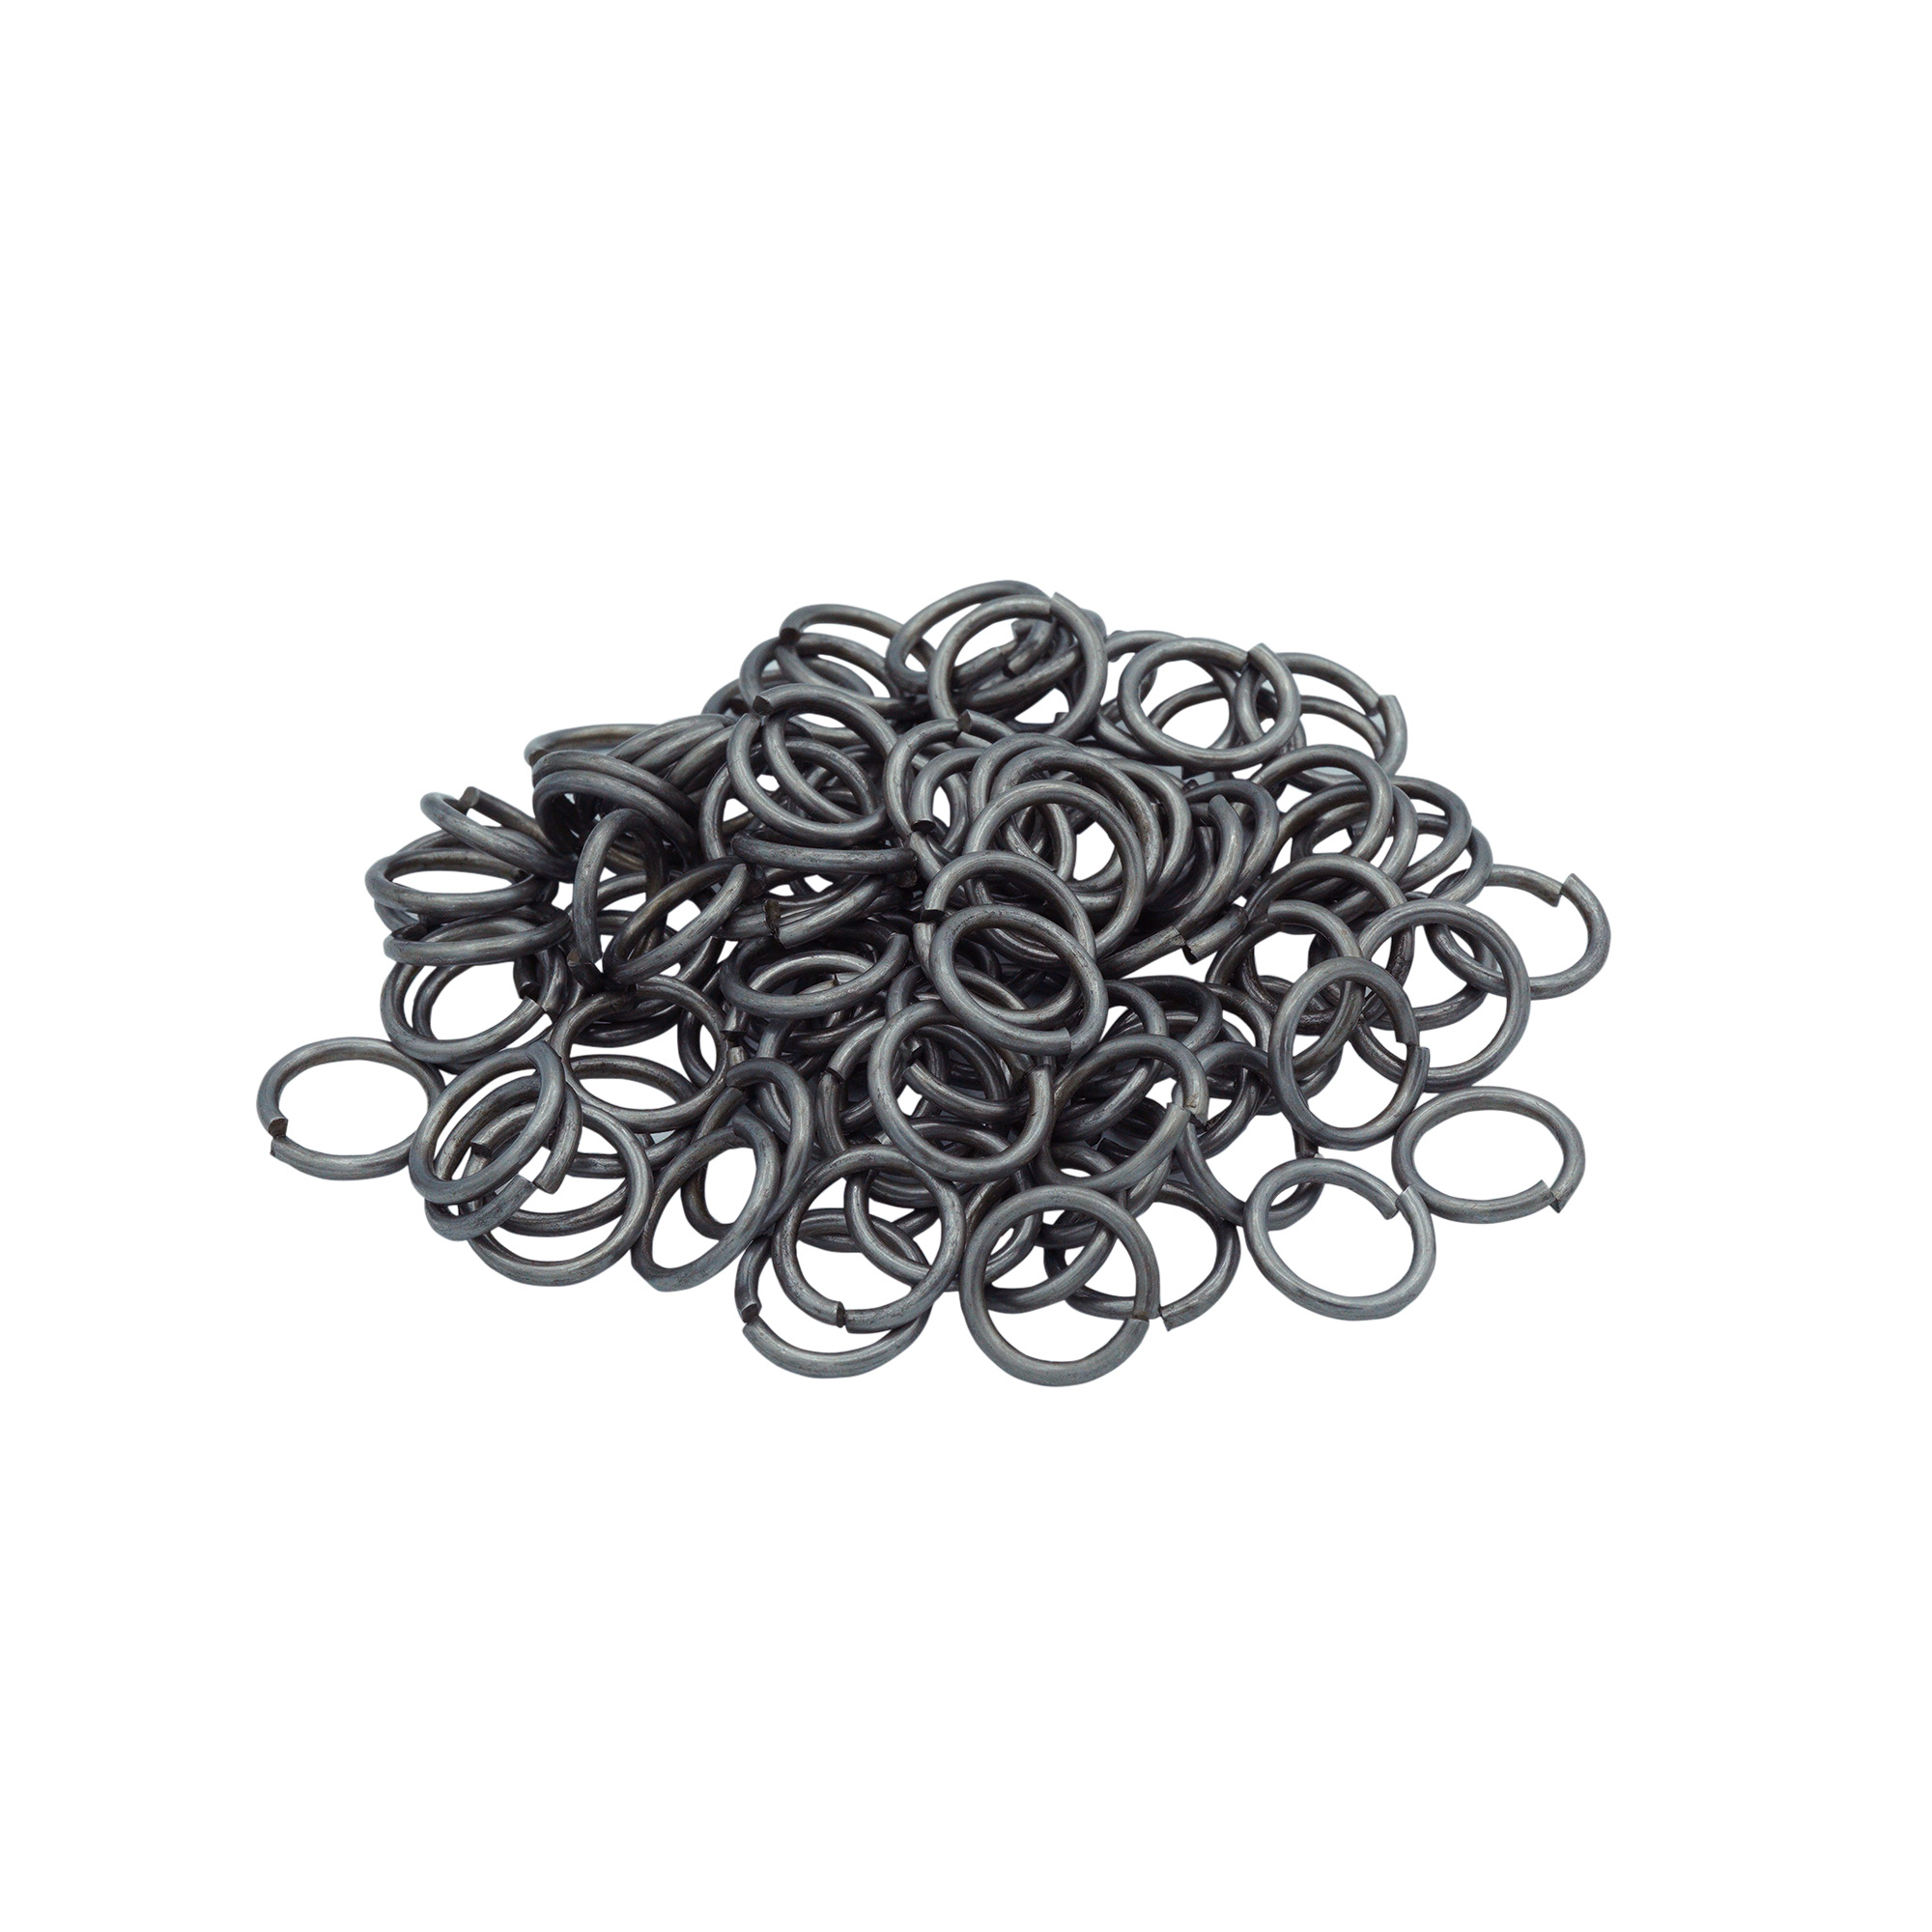 2 kg Loose Mild Steel 6 mm Flat Chainmail Rings with dome rivets 18 gauge